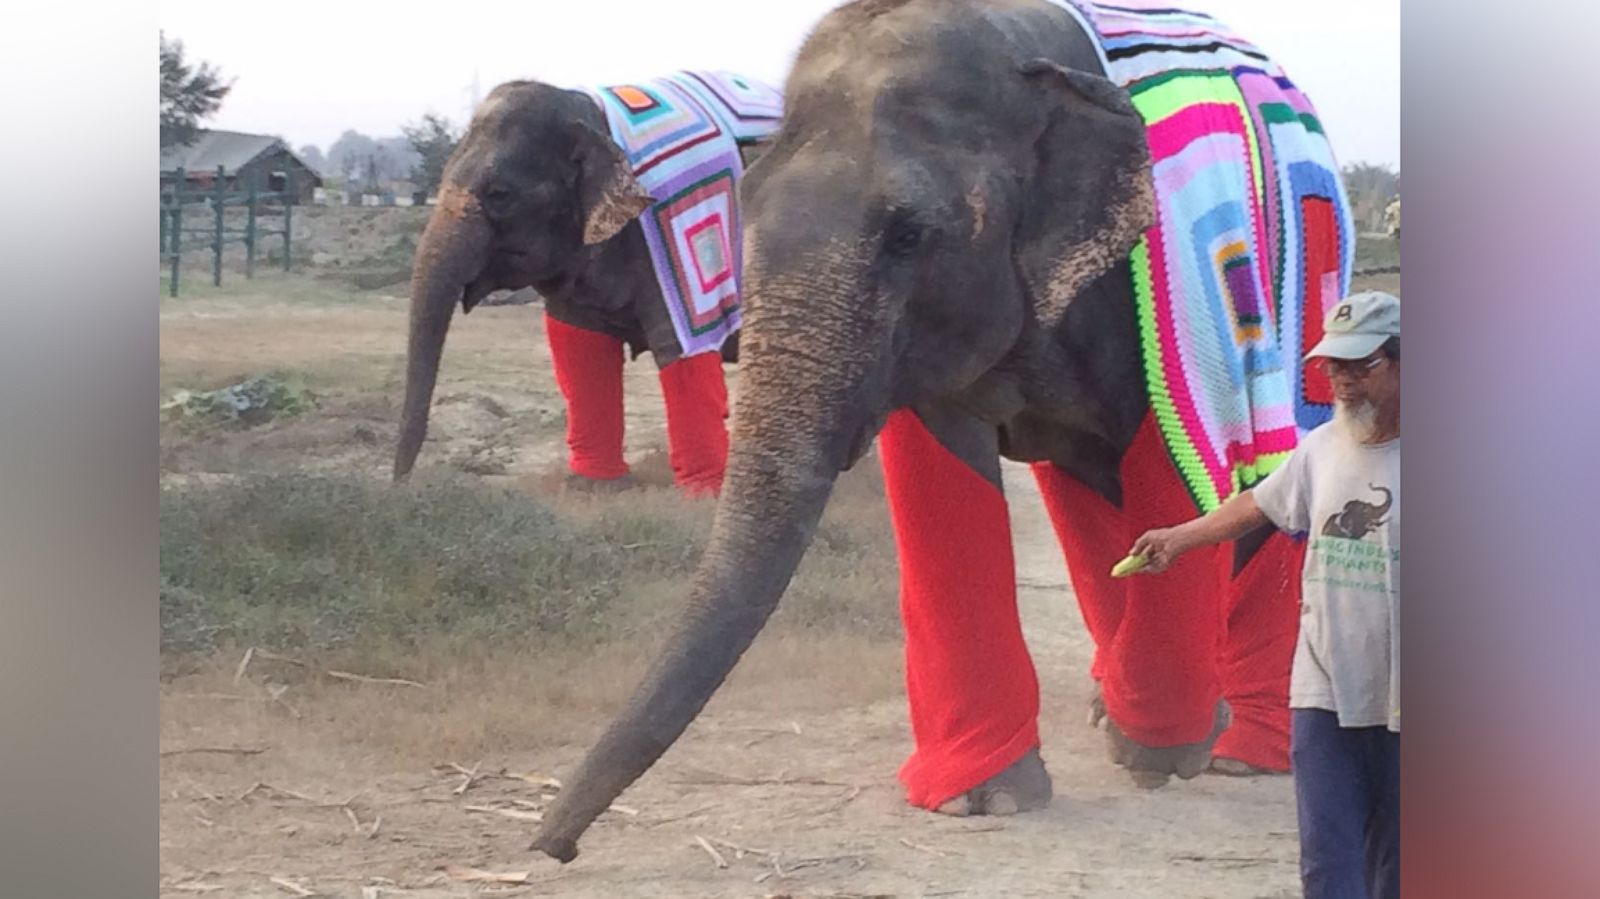 Trolley fumle mavepine Indian Elephants Sport Colorful Knit Sweaters - ABC News